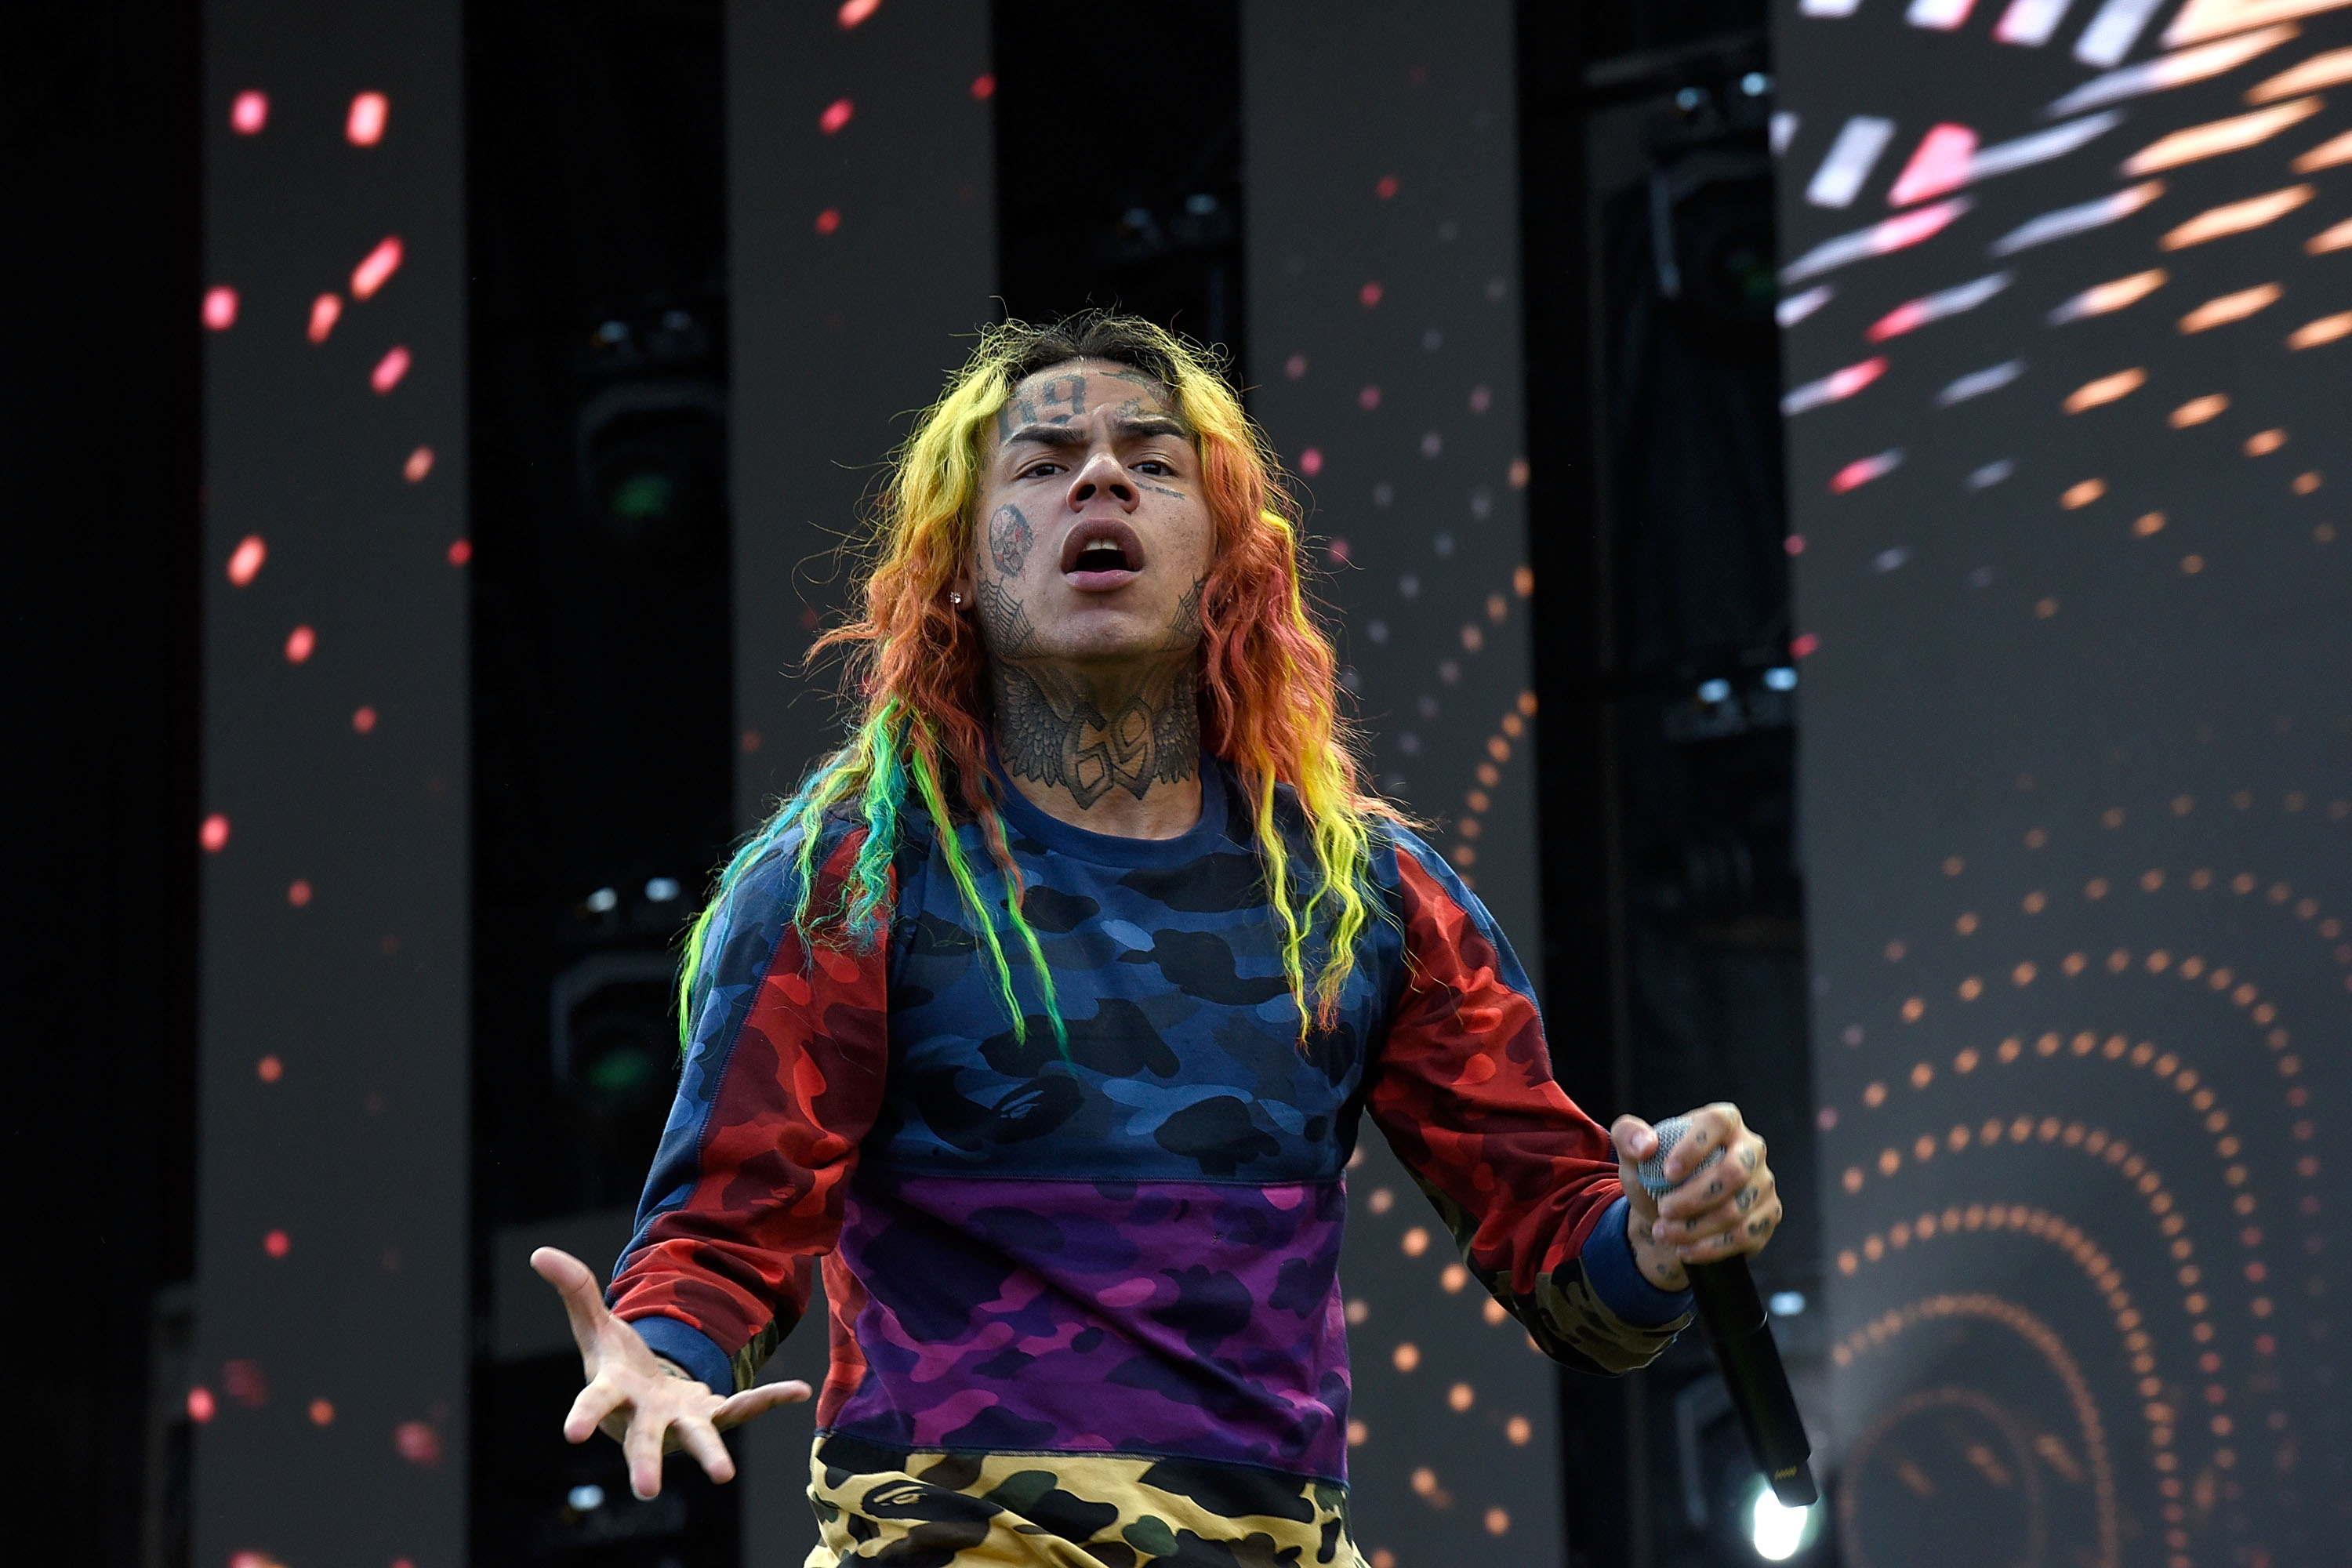 Ix Ine S Reason For Arrest Confirmed By Police